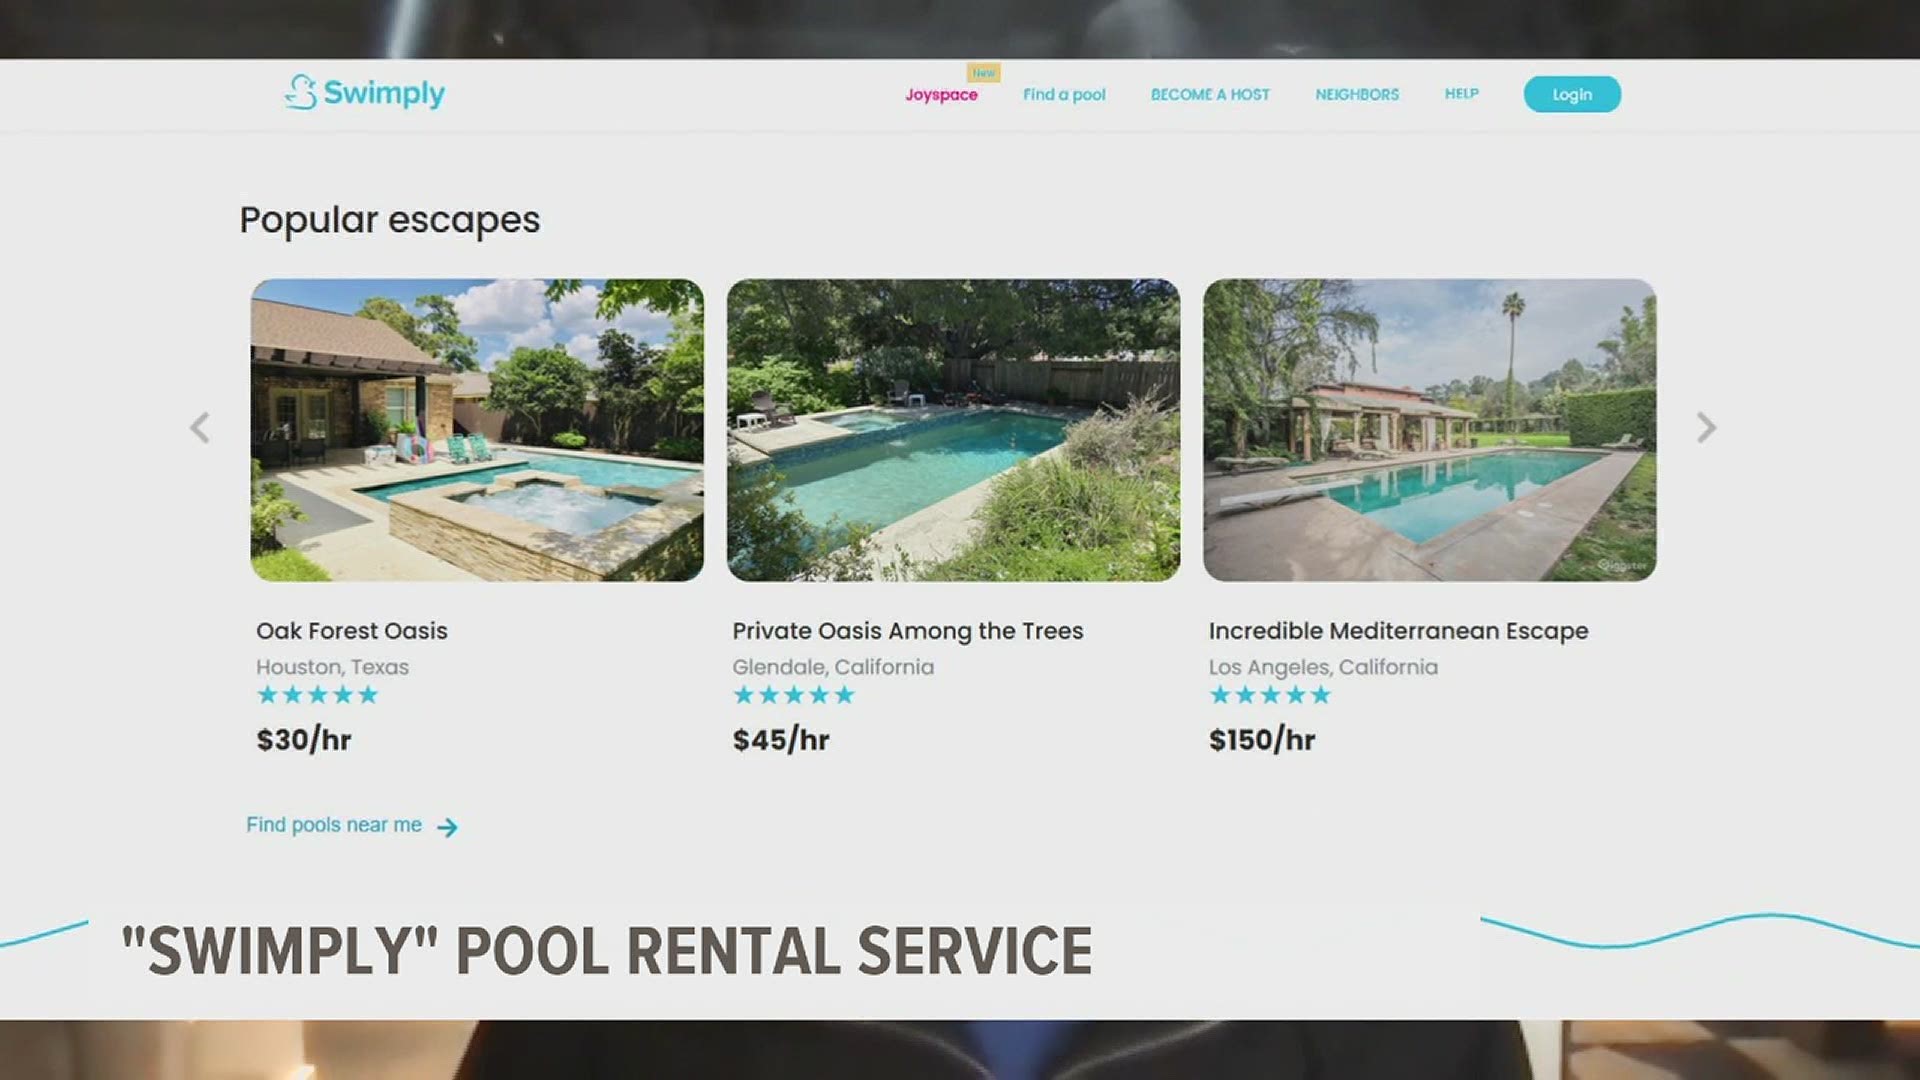 The online service operates similar to AirBnB and allows pool owners to rent their property to strangers by the hour.